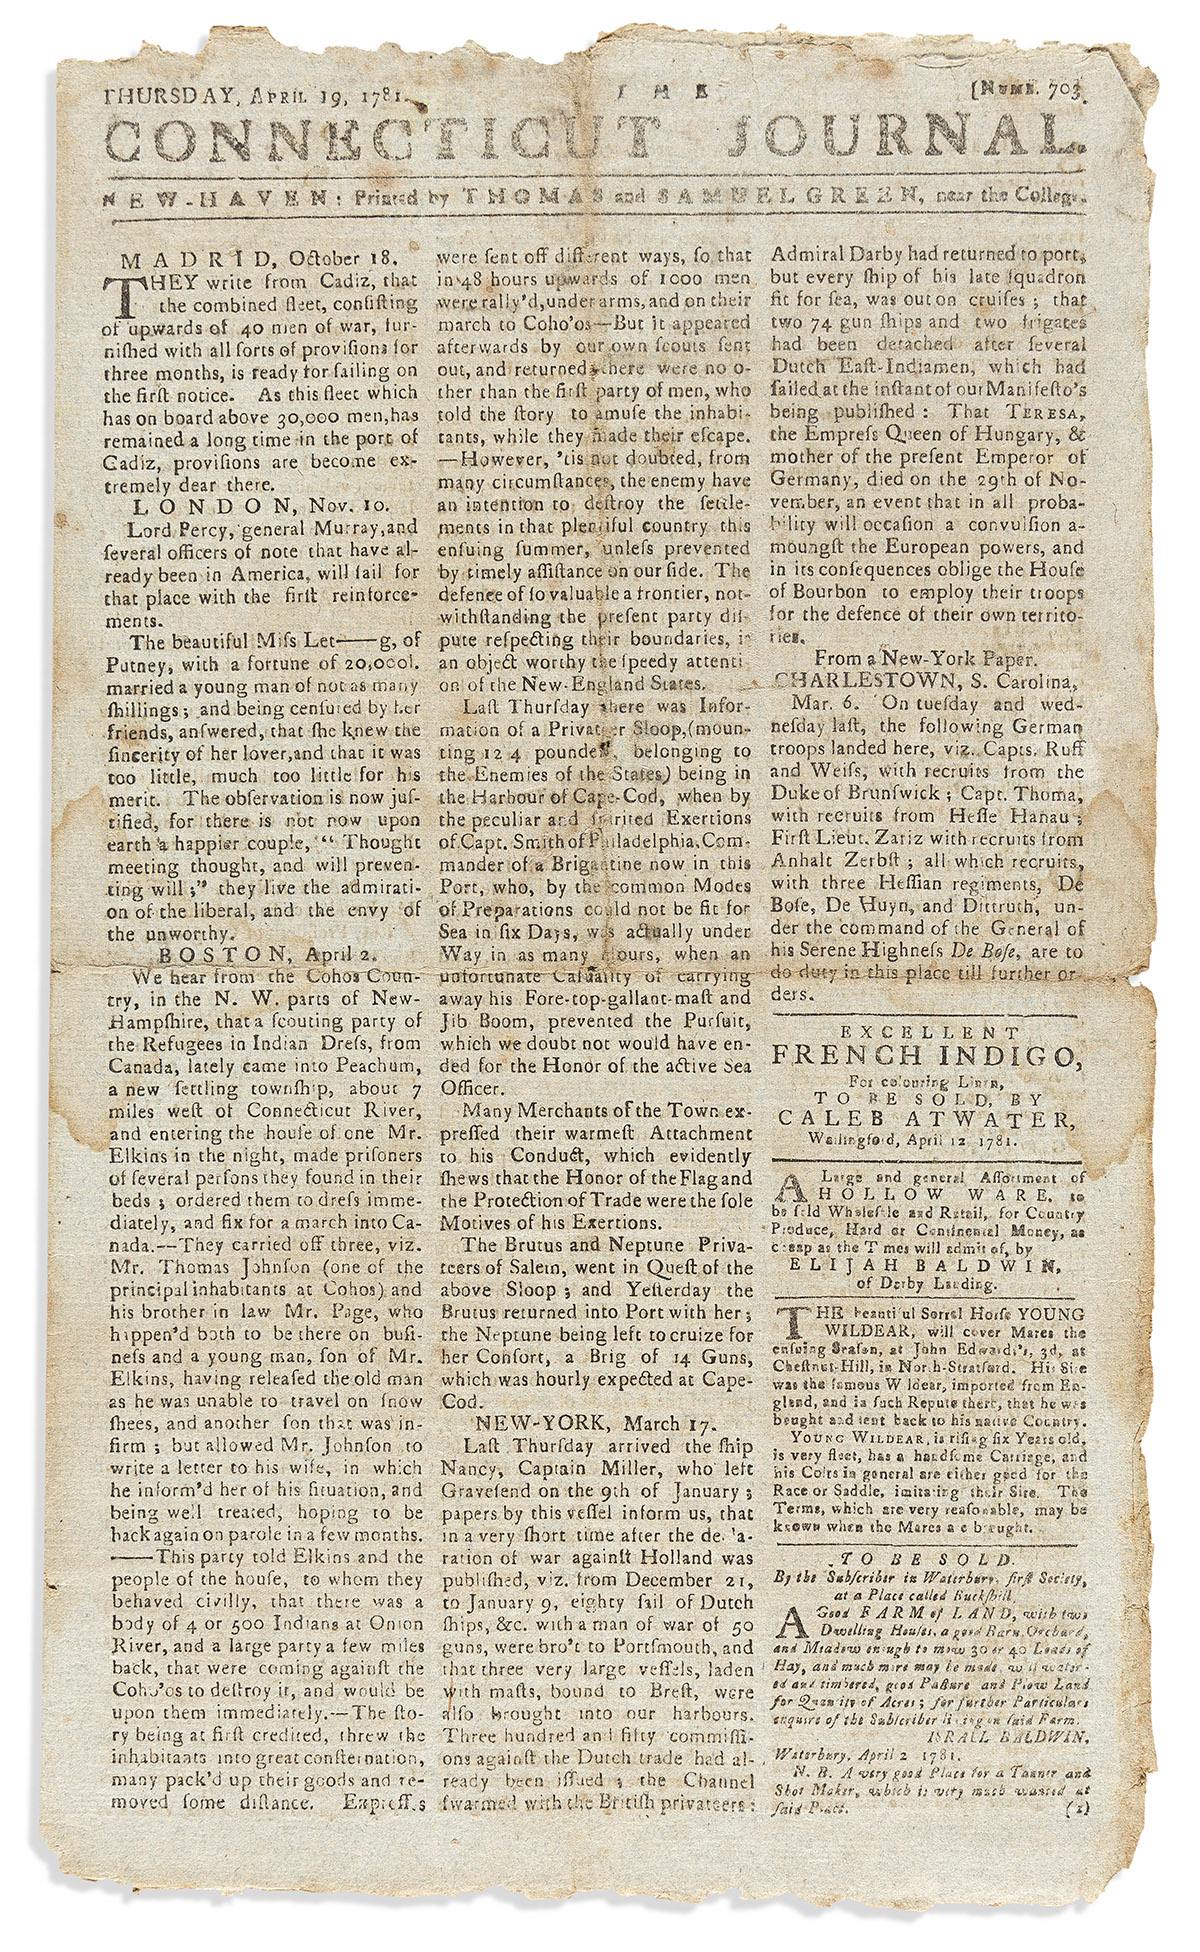 (AMERICAN REVOLUTION--1781.) Issue of the Connecticut Journal describing the Battle of Guilford Court House.